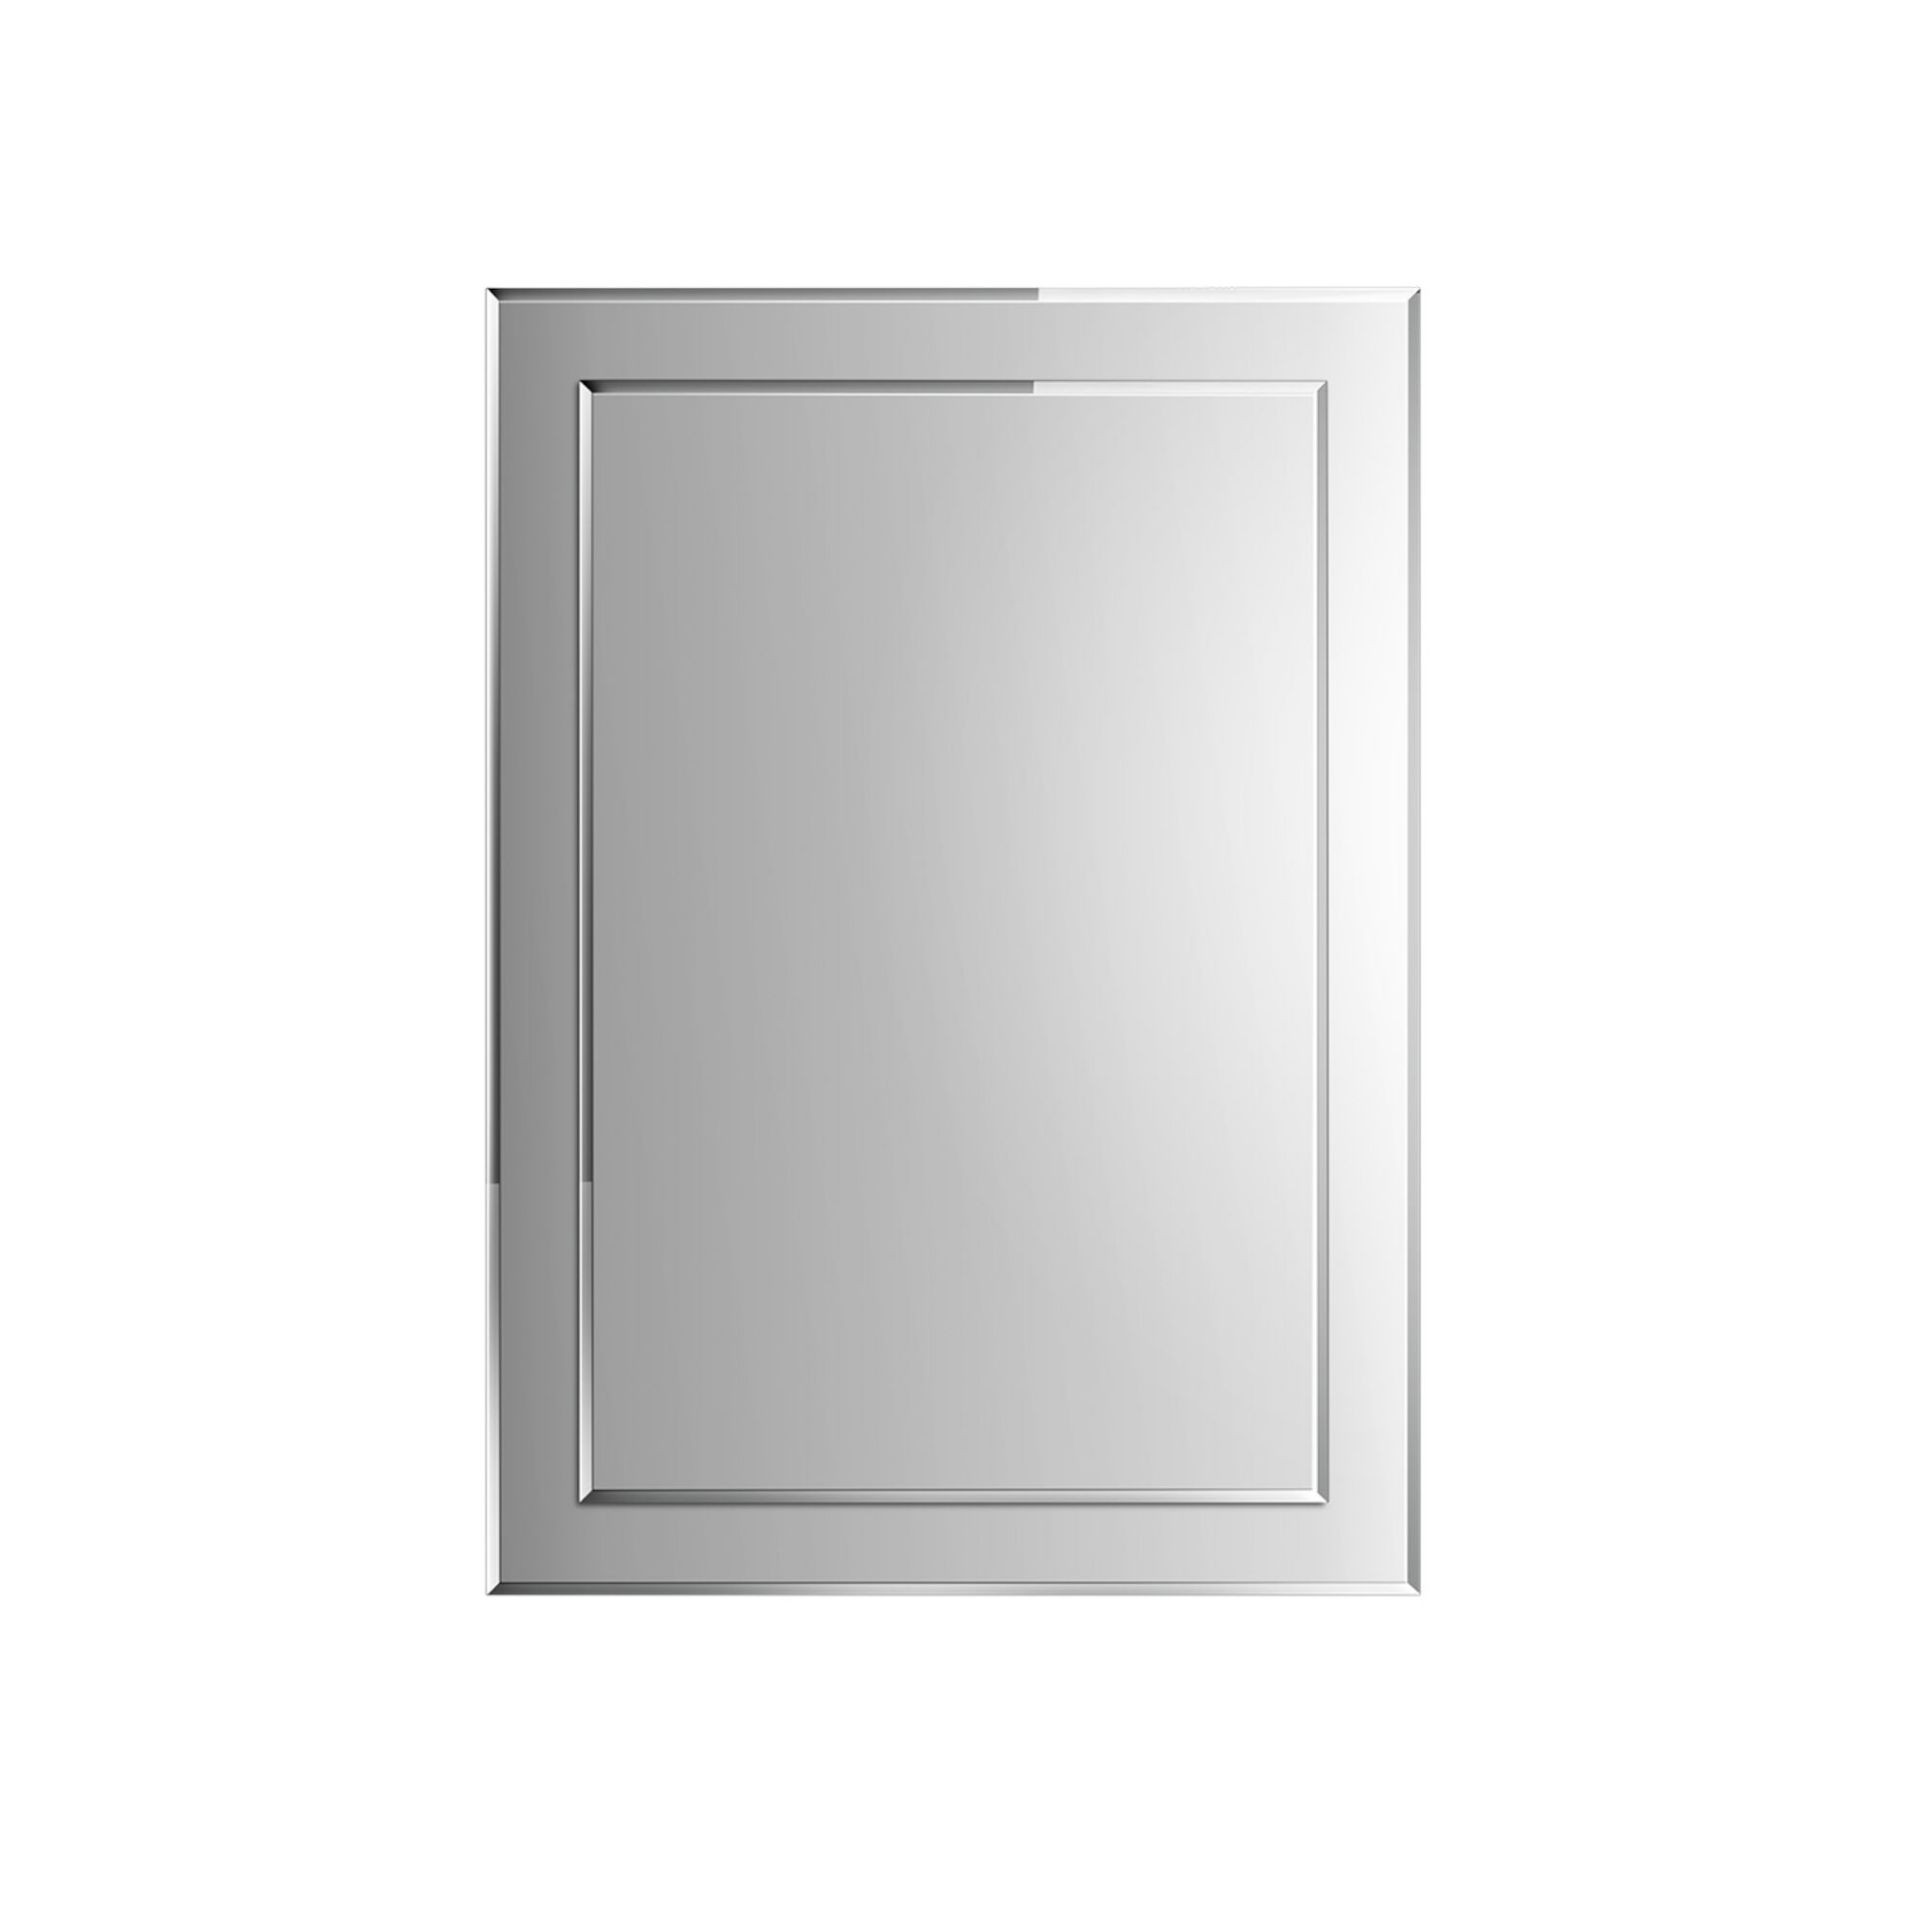 (SA211) 500x700mm Bevel Mirror. Comes fully assembled for added convenience Versatile with a - Image 2 of 2